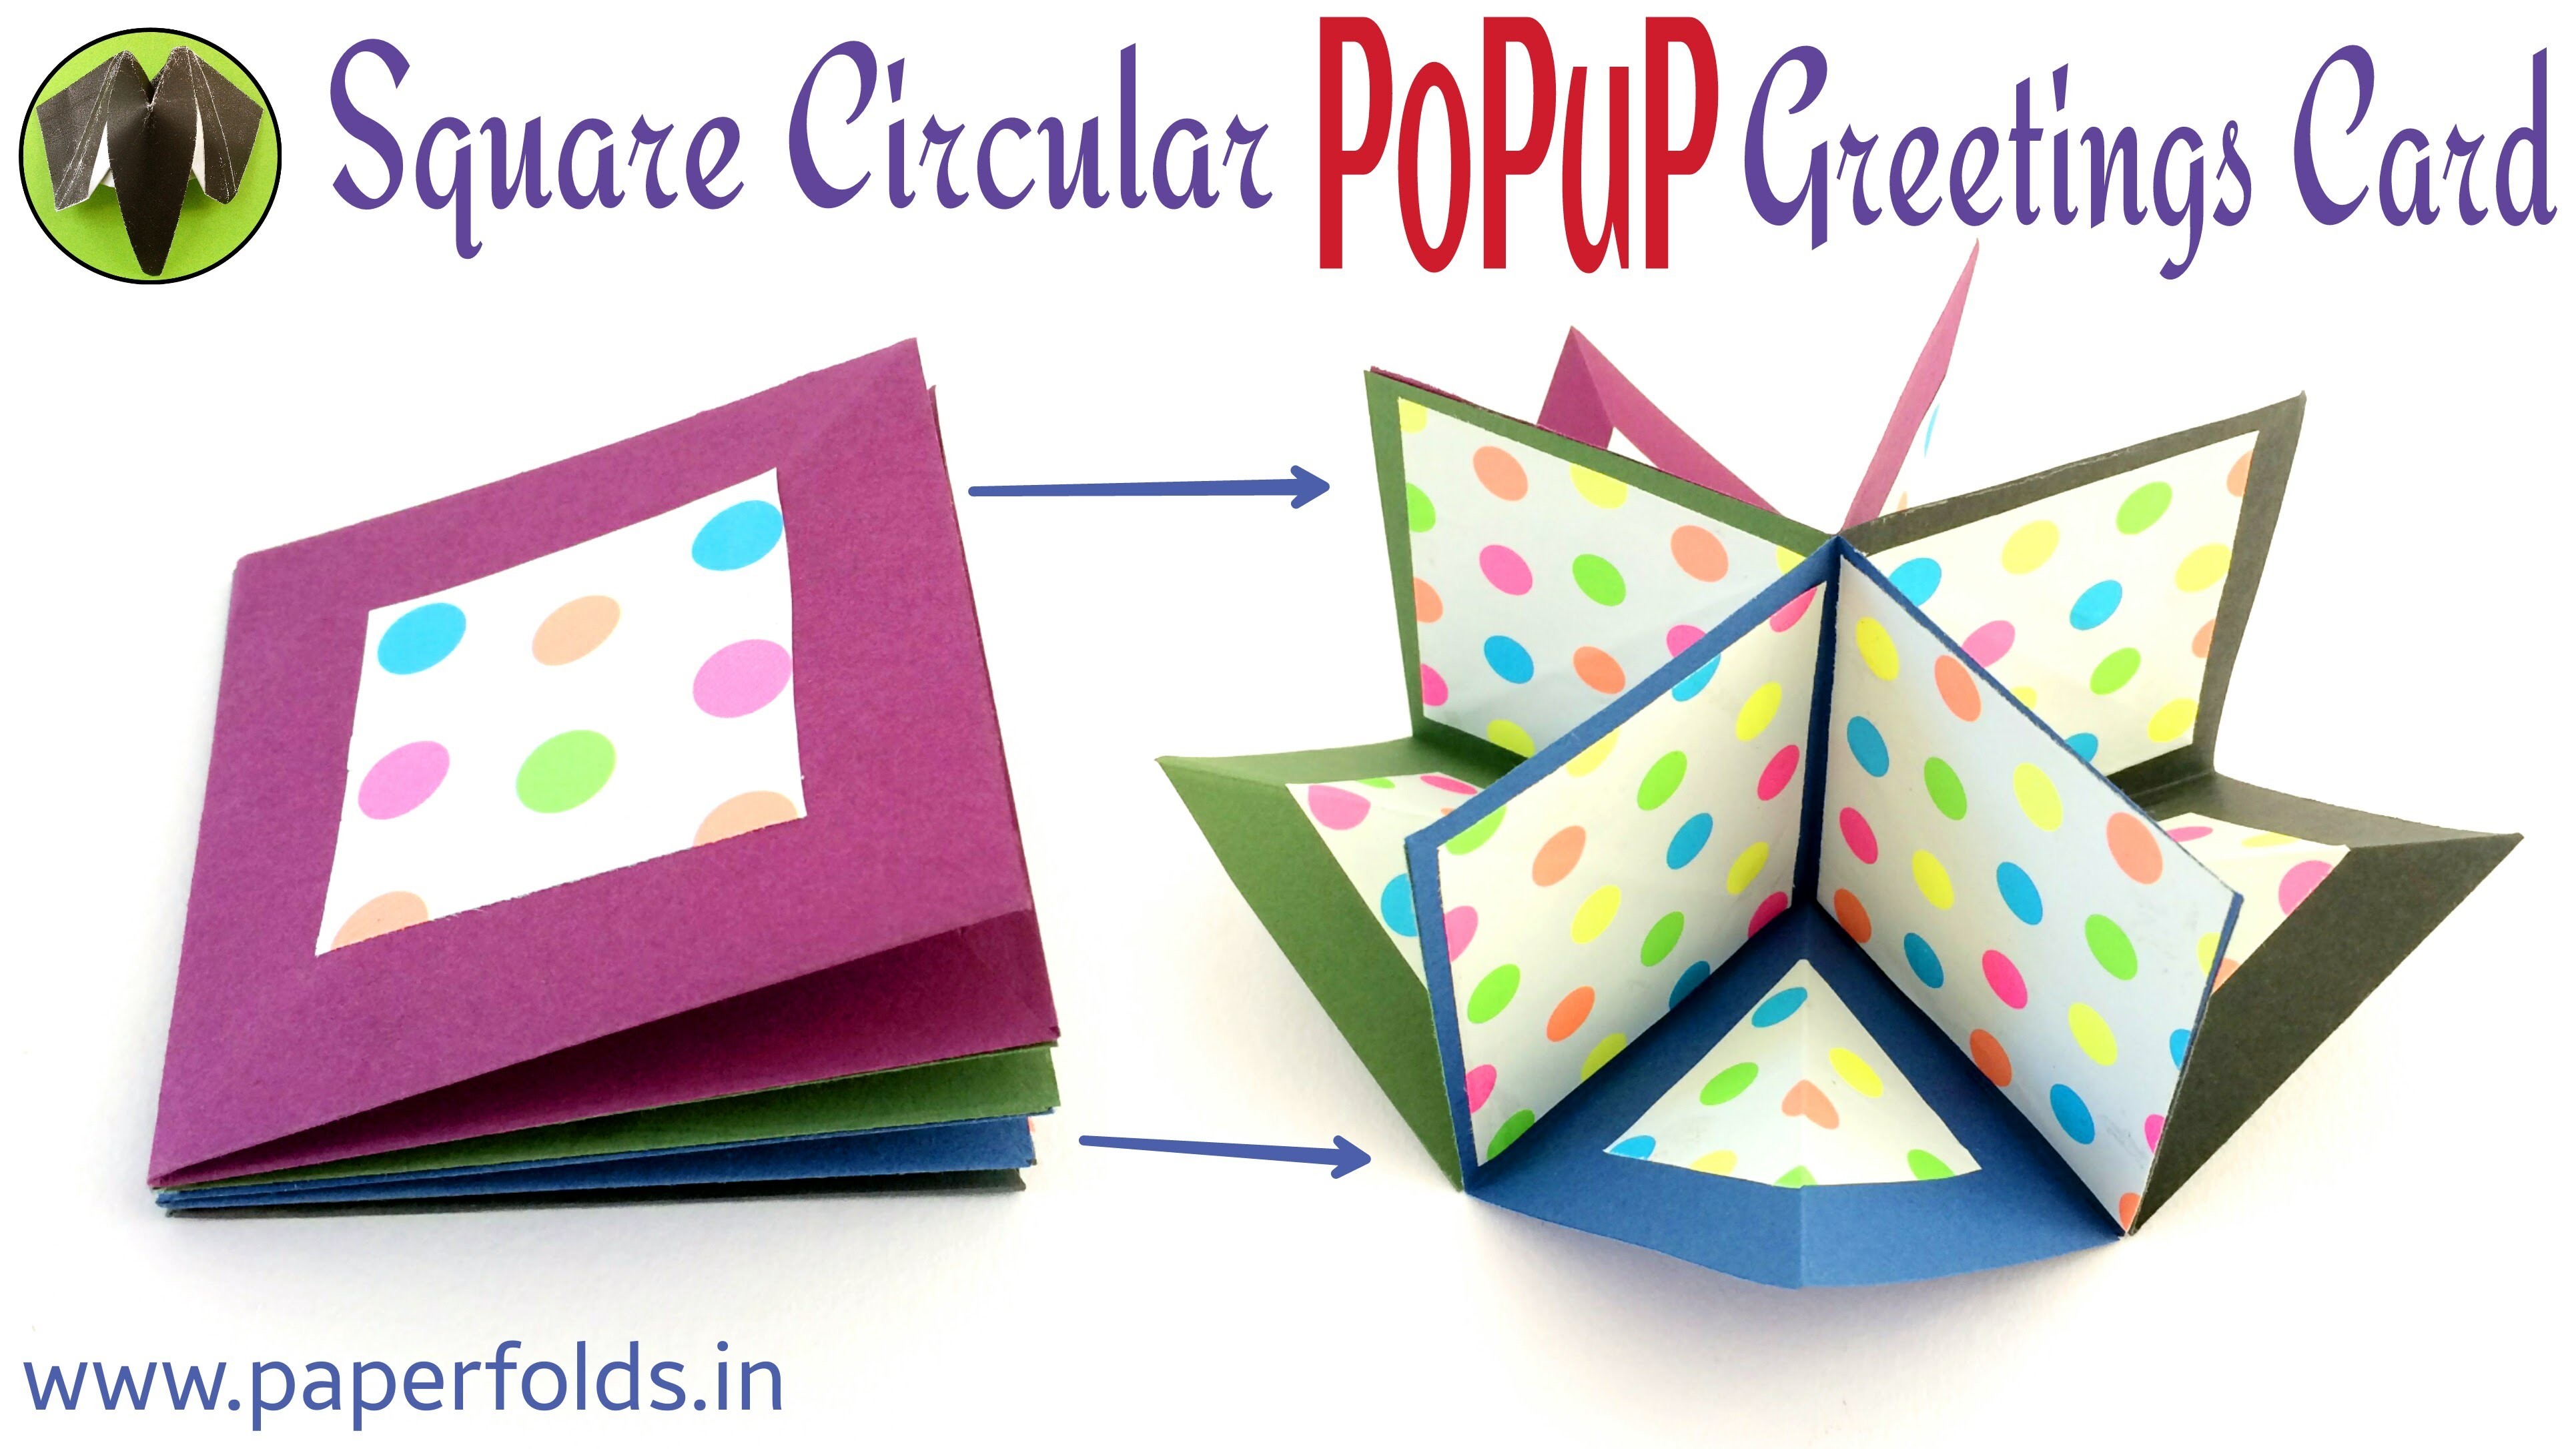 How to make a "Square Circular Popup greeting card"  - Paper craft Tutorial